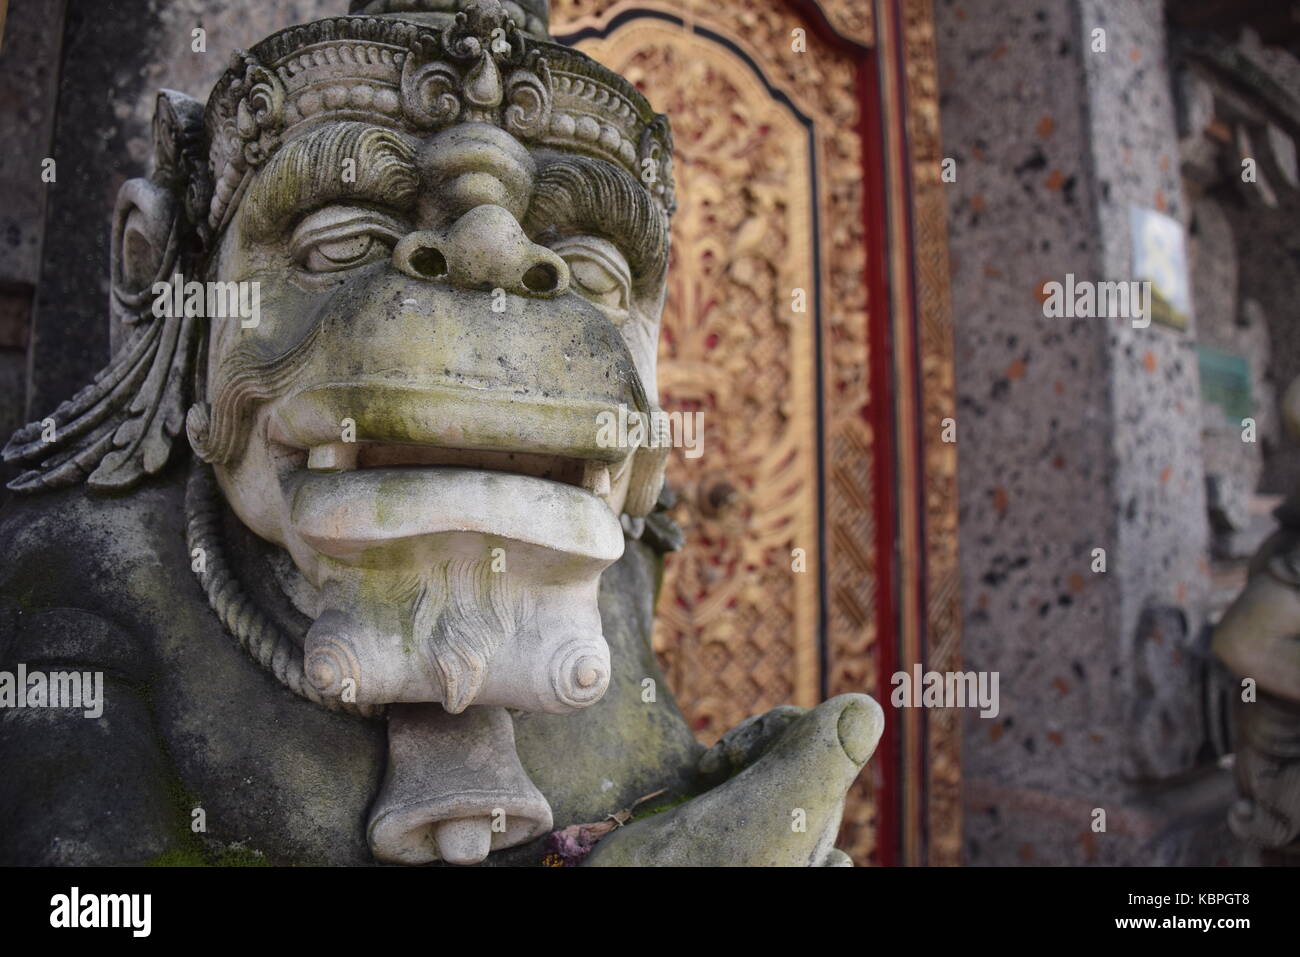 Statue and decorated door on the streets of Ubud, Bali - Indonesia Stock Photo